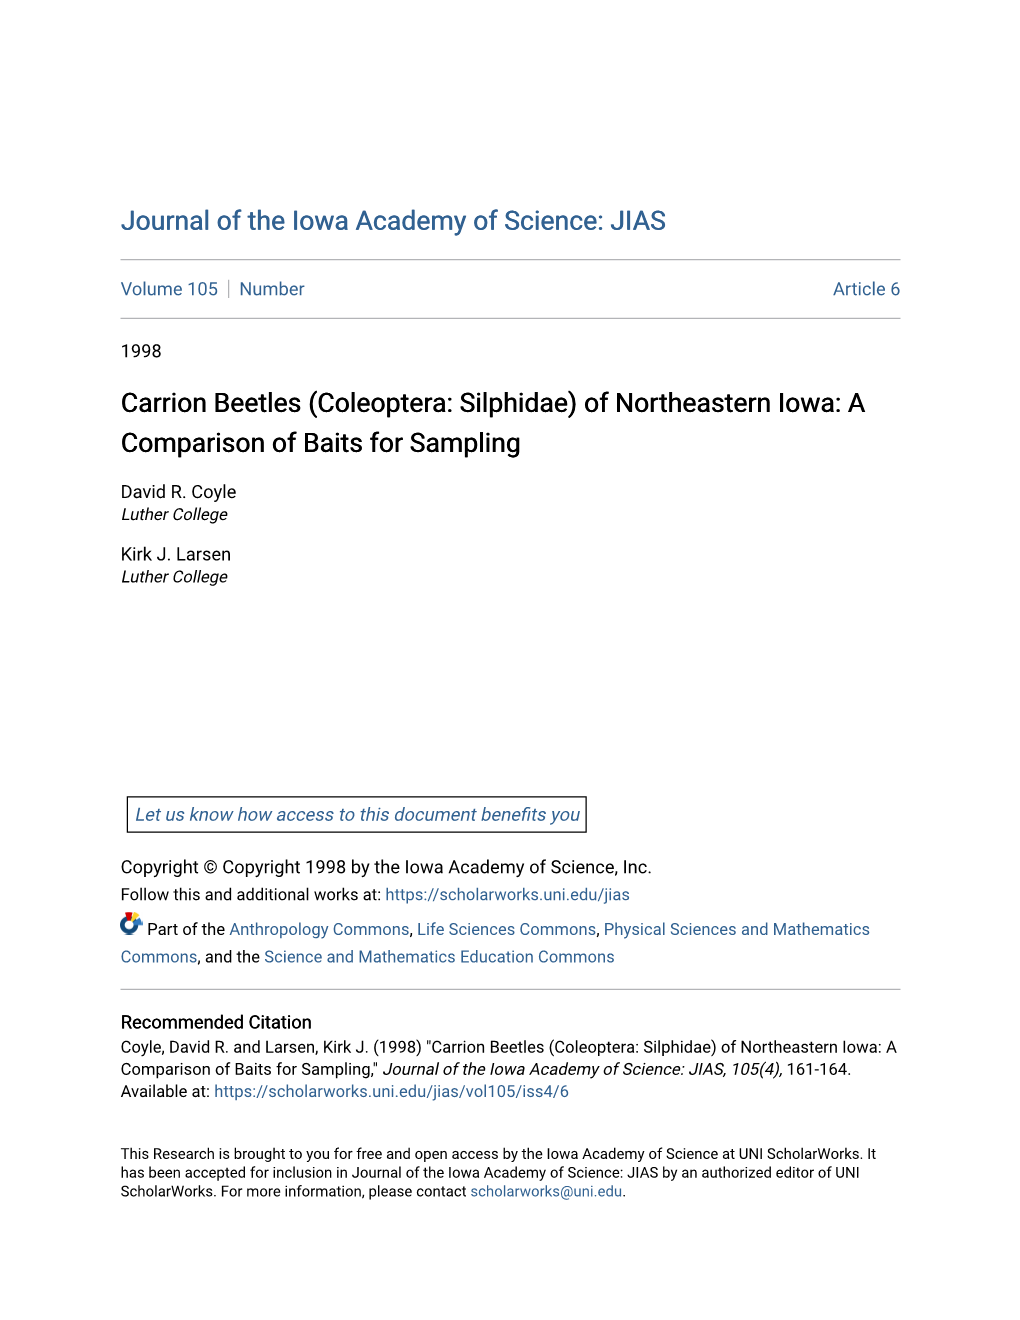 Carrion Beetles (Coleoptera: Silphidae) of Northeastern Iowa: a Comparison of Baits for Sampling